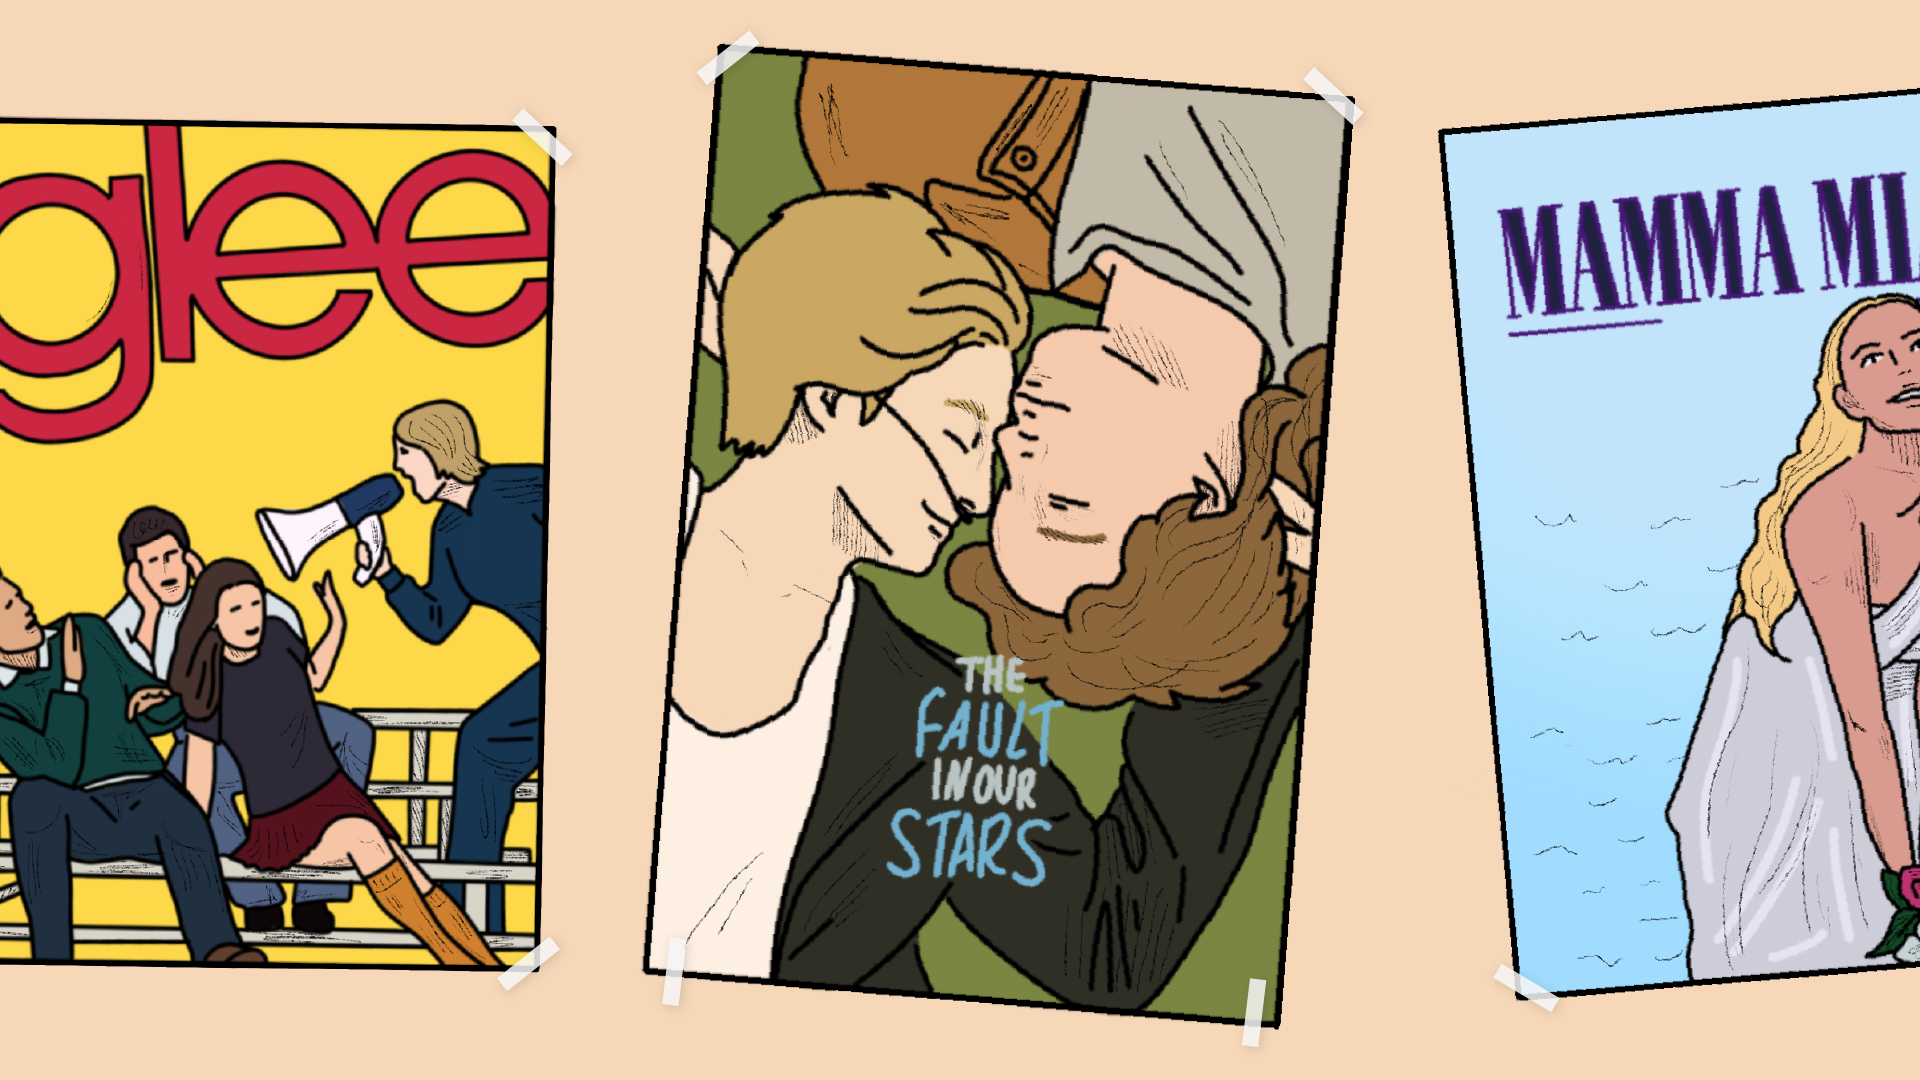 Illustrations of the covers of Glee, The Legend of Zelda: Animated Series, Mamma Mia, and The Fault in Our Stars